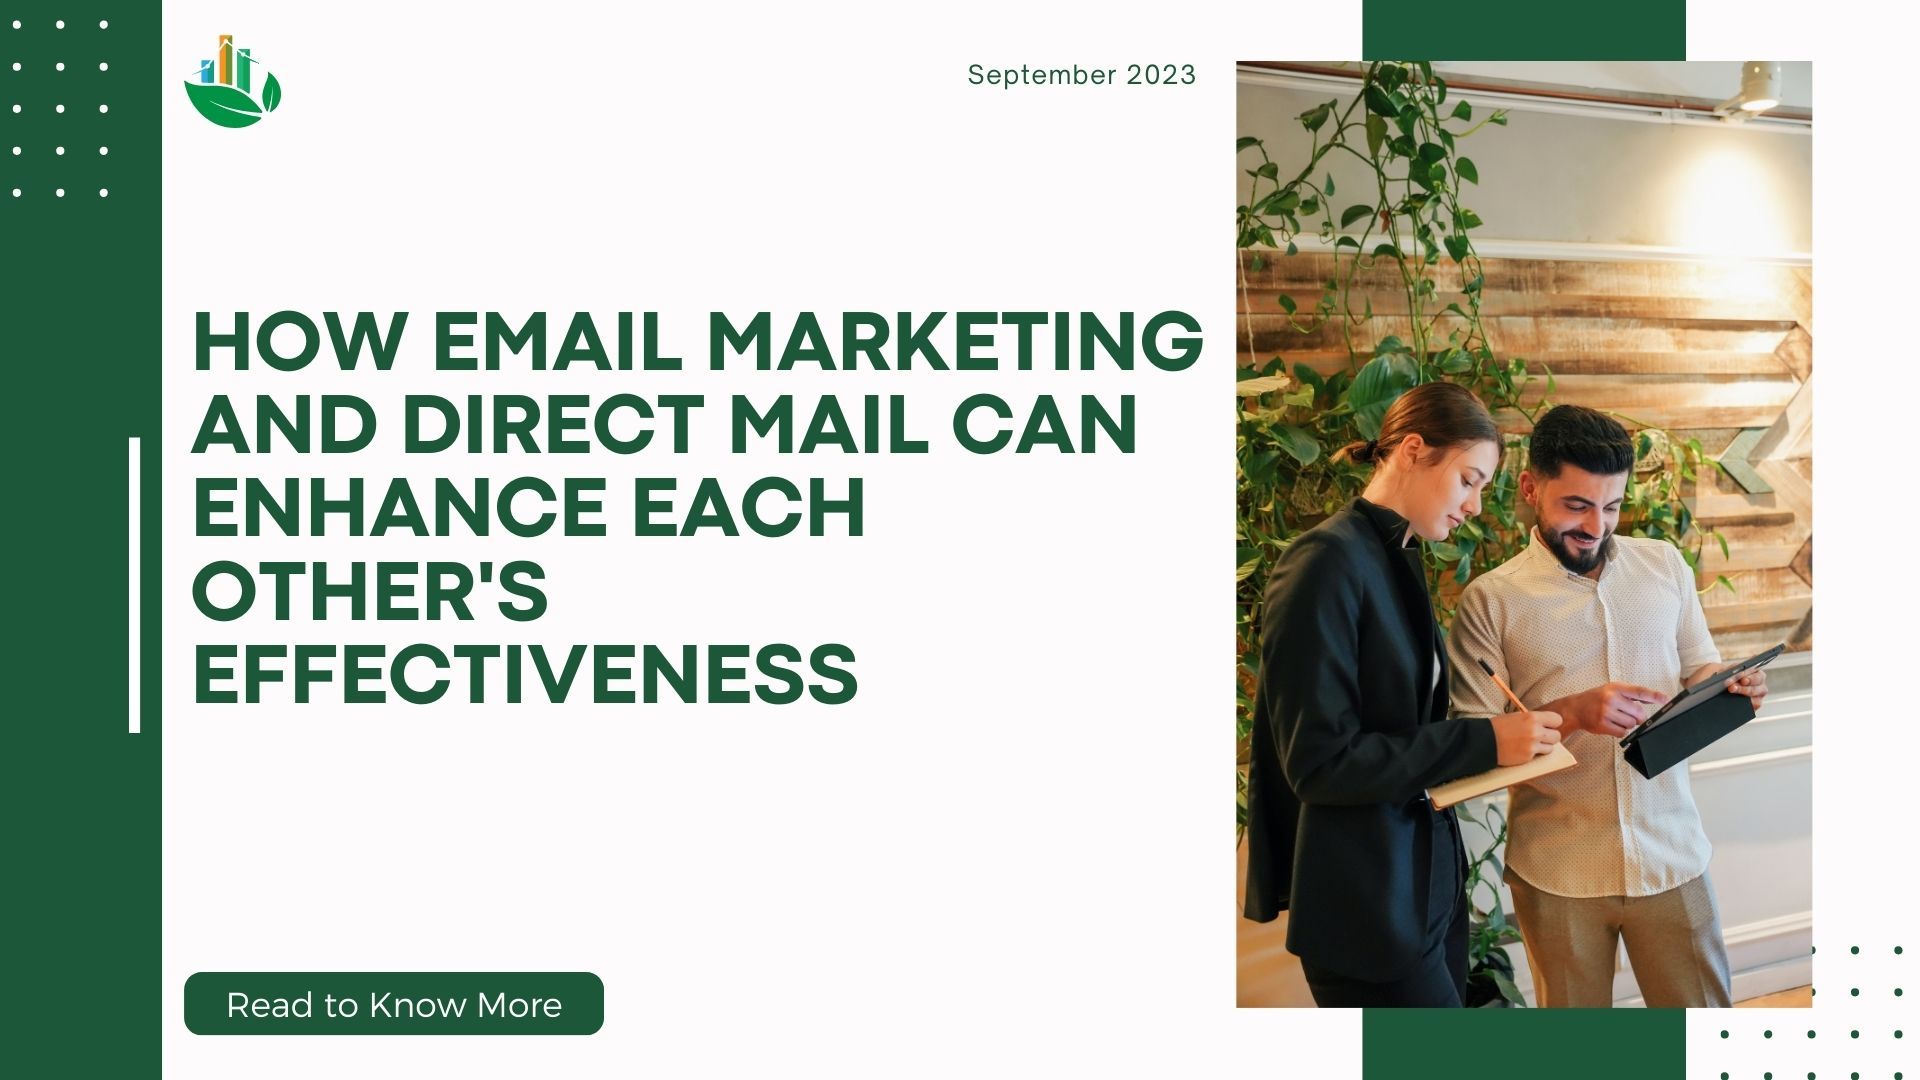 How Email Marketing and Direct Mail Can Enhance Each Other’s Effectiveness